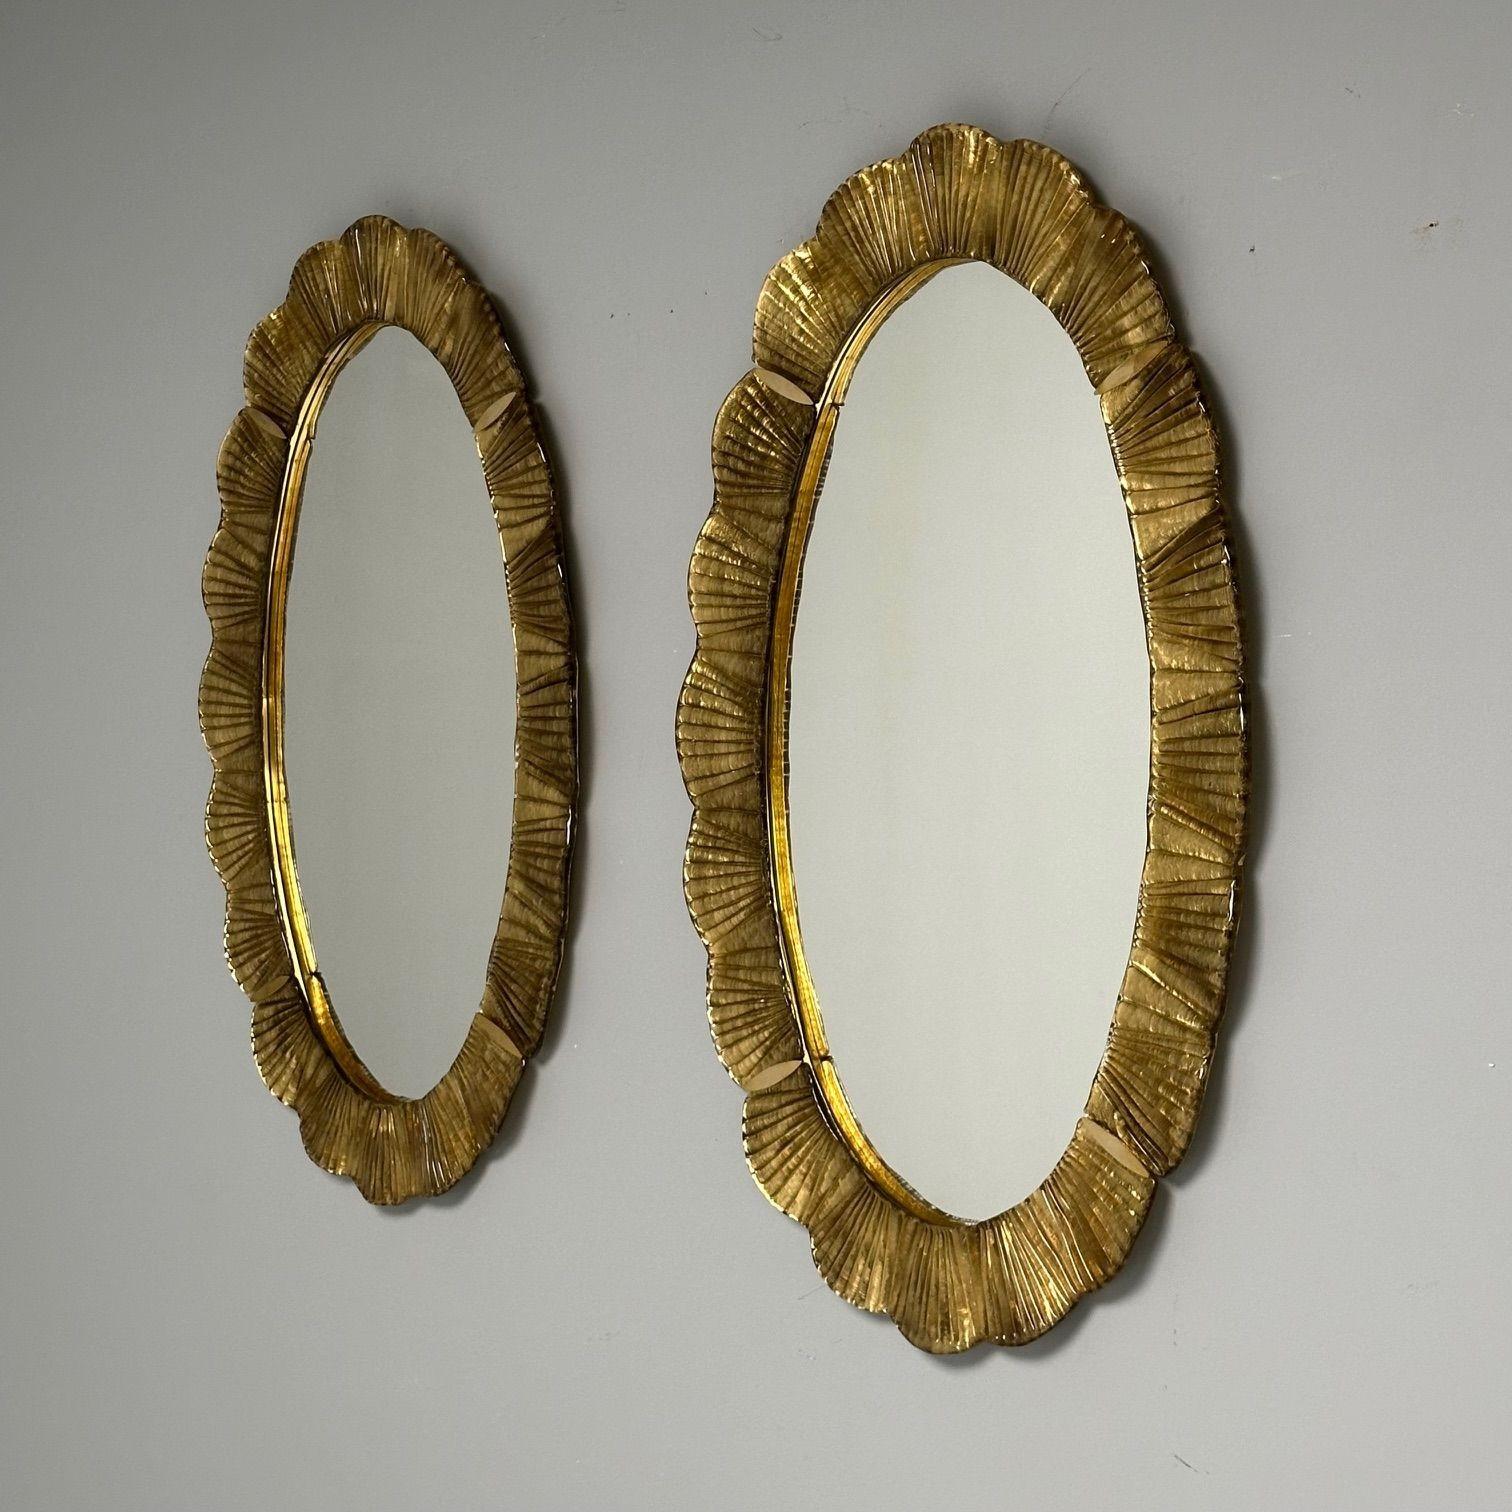 Contemporary, Oval Wall Mirrors, Scallop Motif, Murano Glass, Gilt Gold, Italy For Sale 3